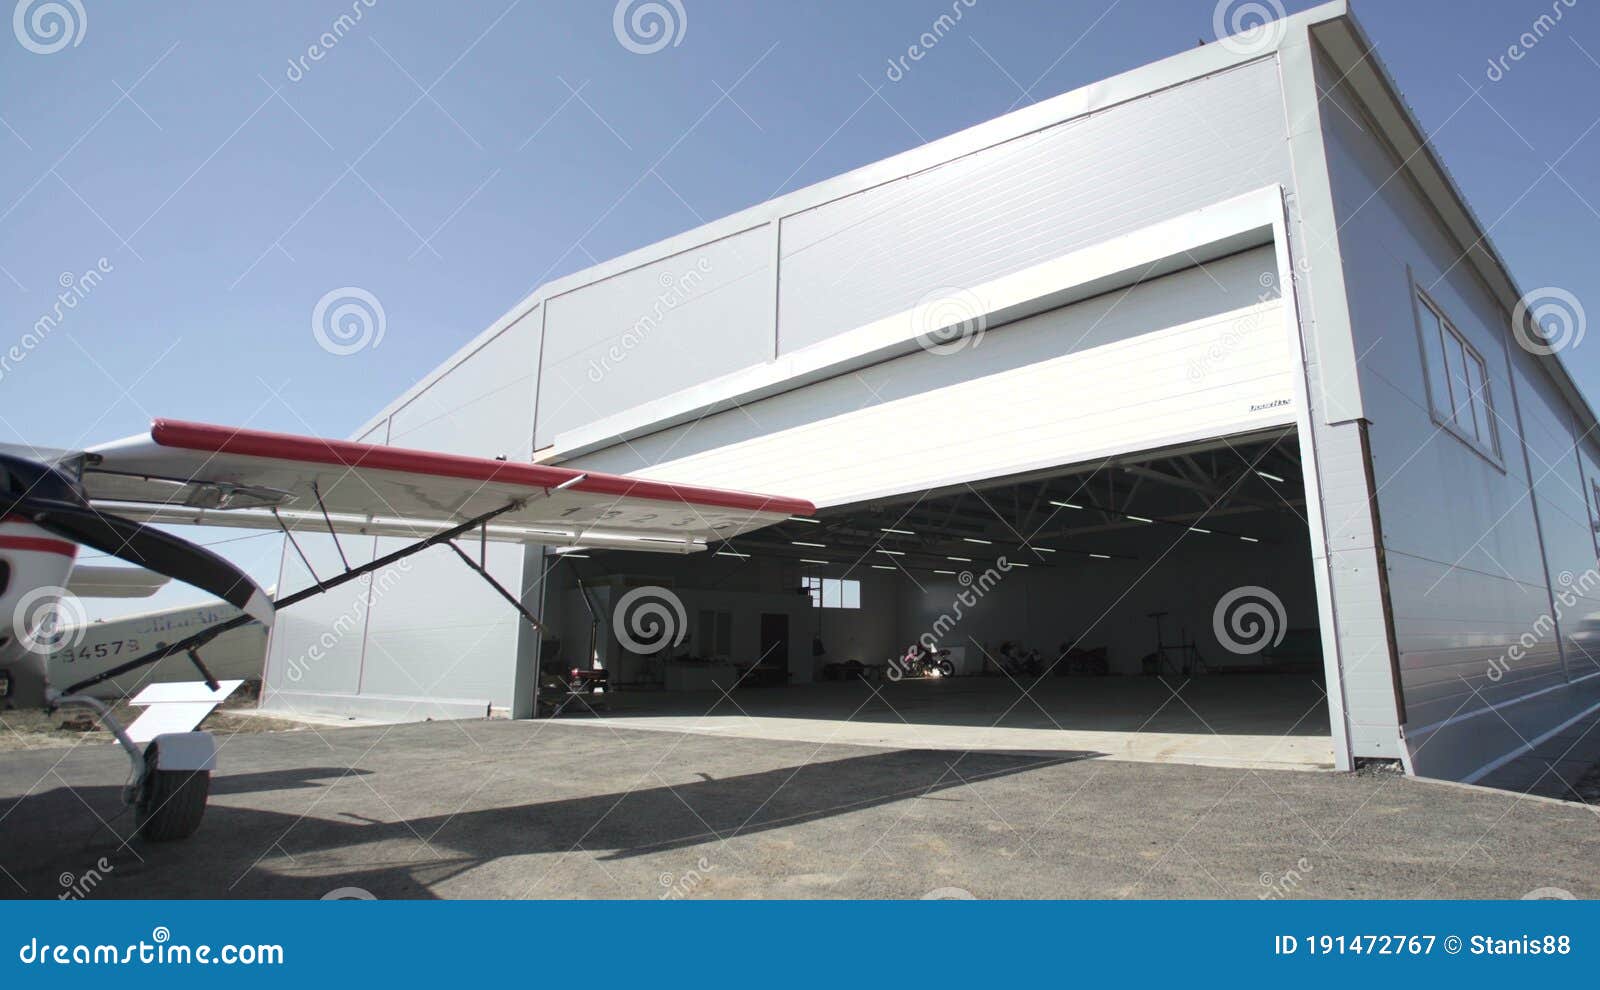 small airplanes outside hangar. door is opening. visible part of a small aircraft